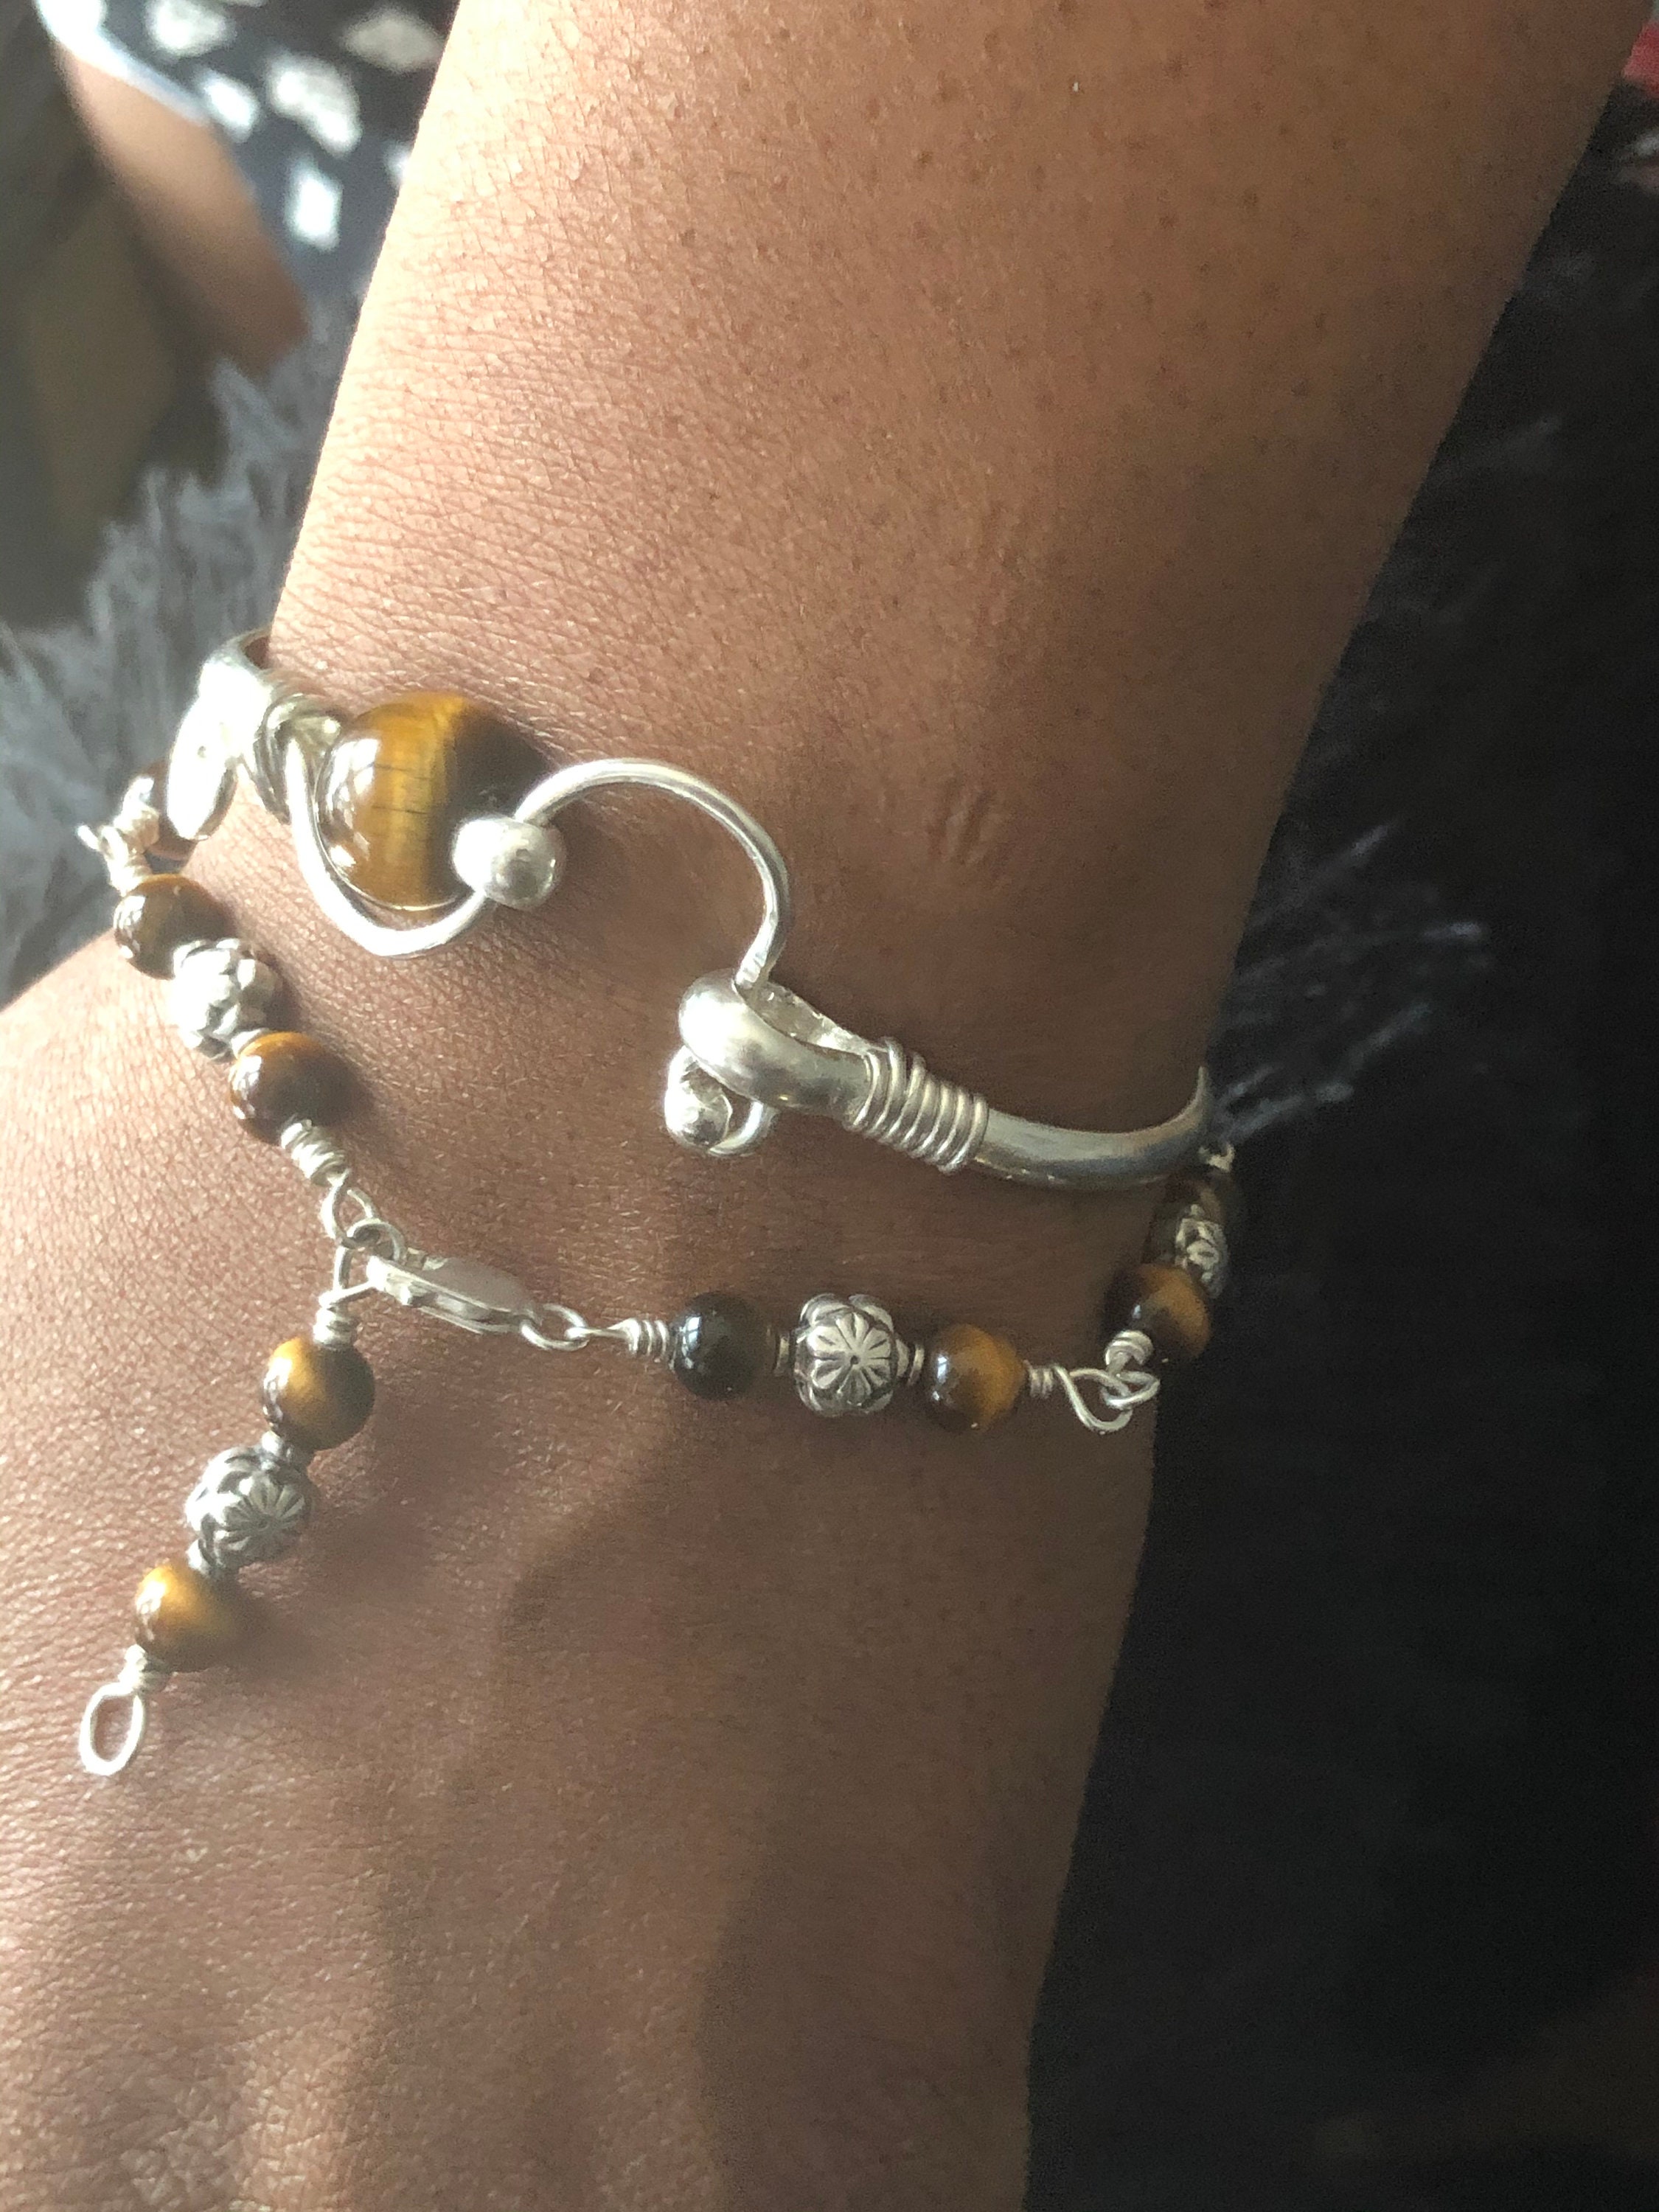 Tiger Eye Hook 925 Sterling Silver Bangle Bracelet. Caribbean Hook Style, Handcrafted, Wire Wrapped Durable Bangle Solid 925 Sterling Silver